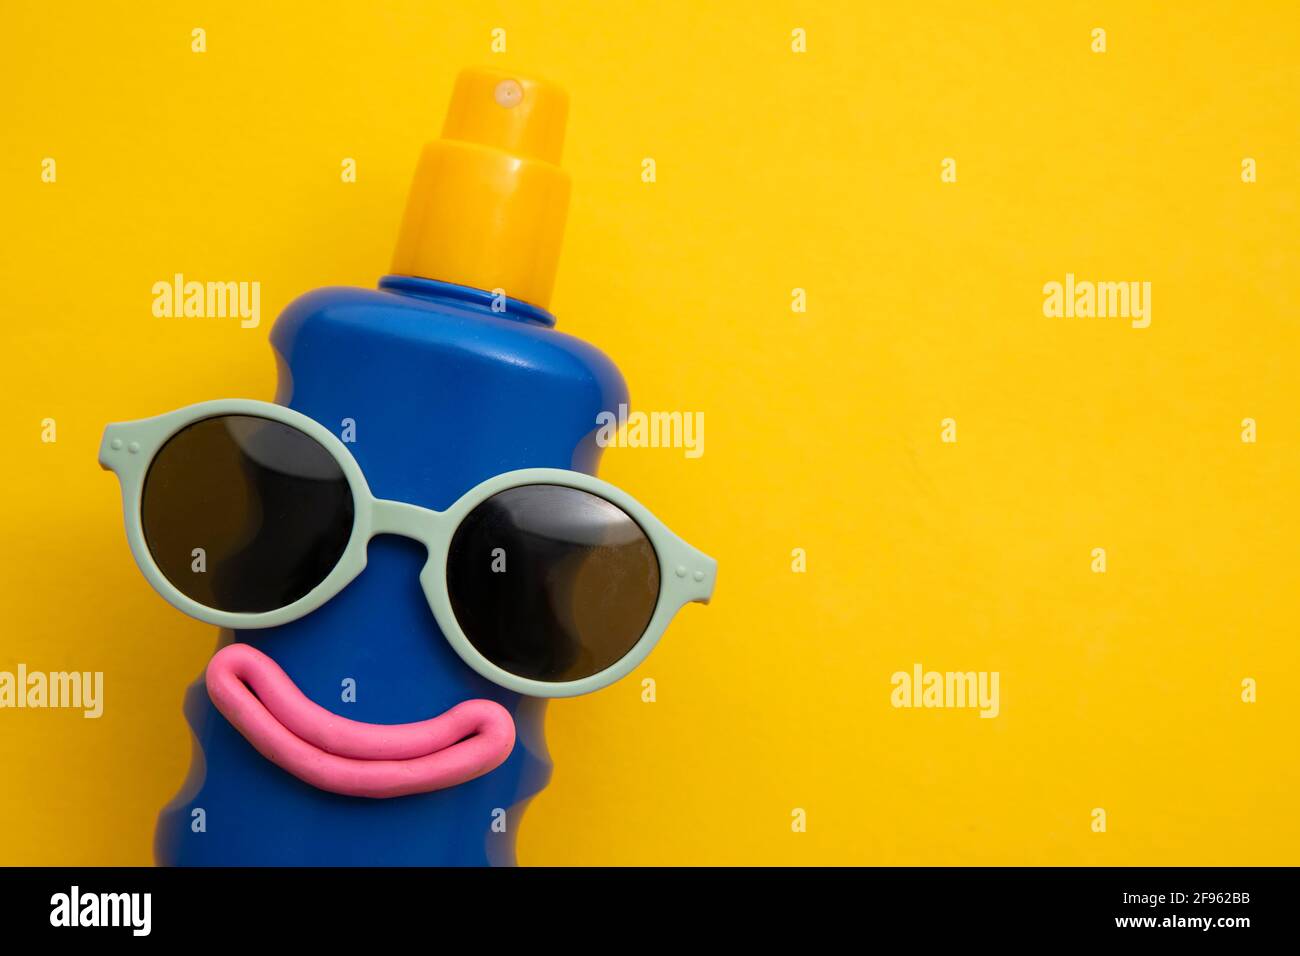 Happy sun block bottle wearing sunglasses and a smile on a yellow background Stock Photo